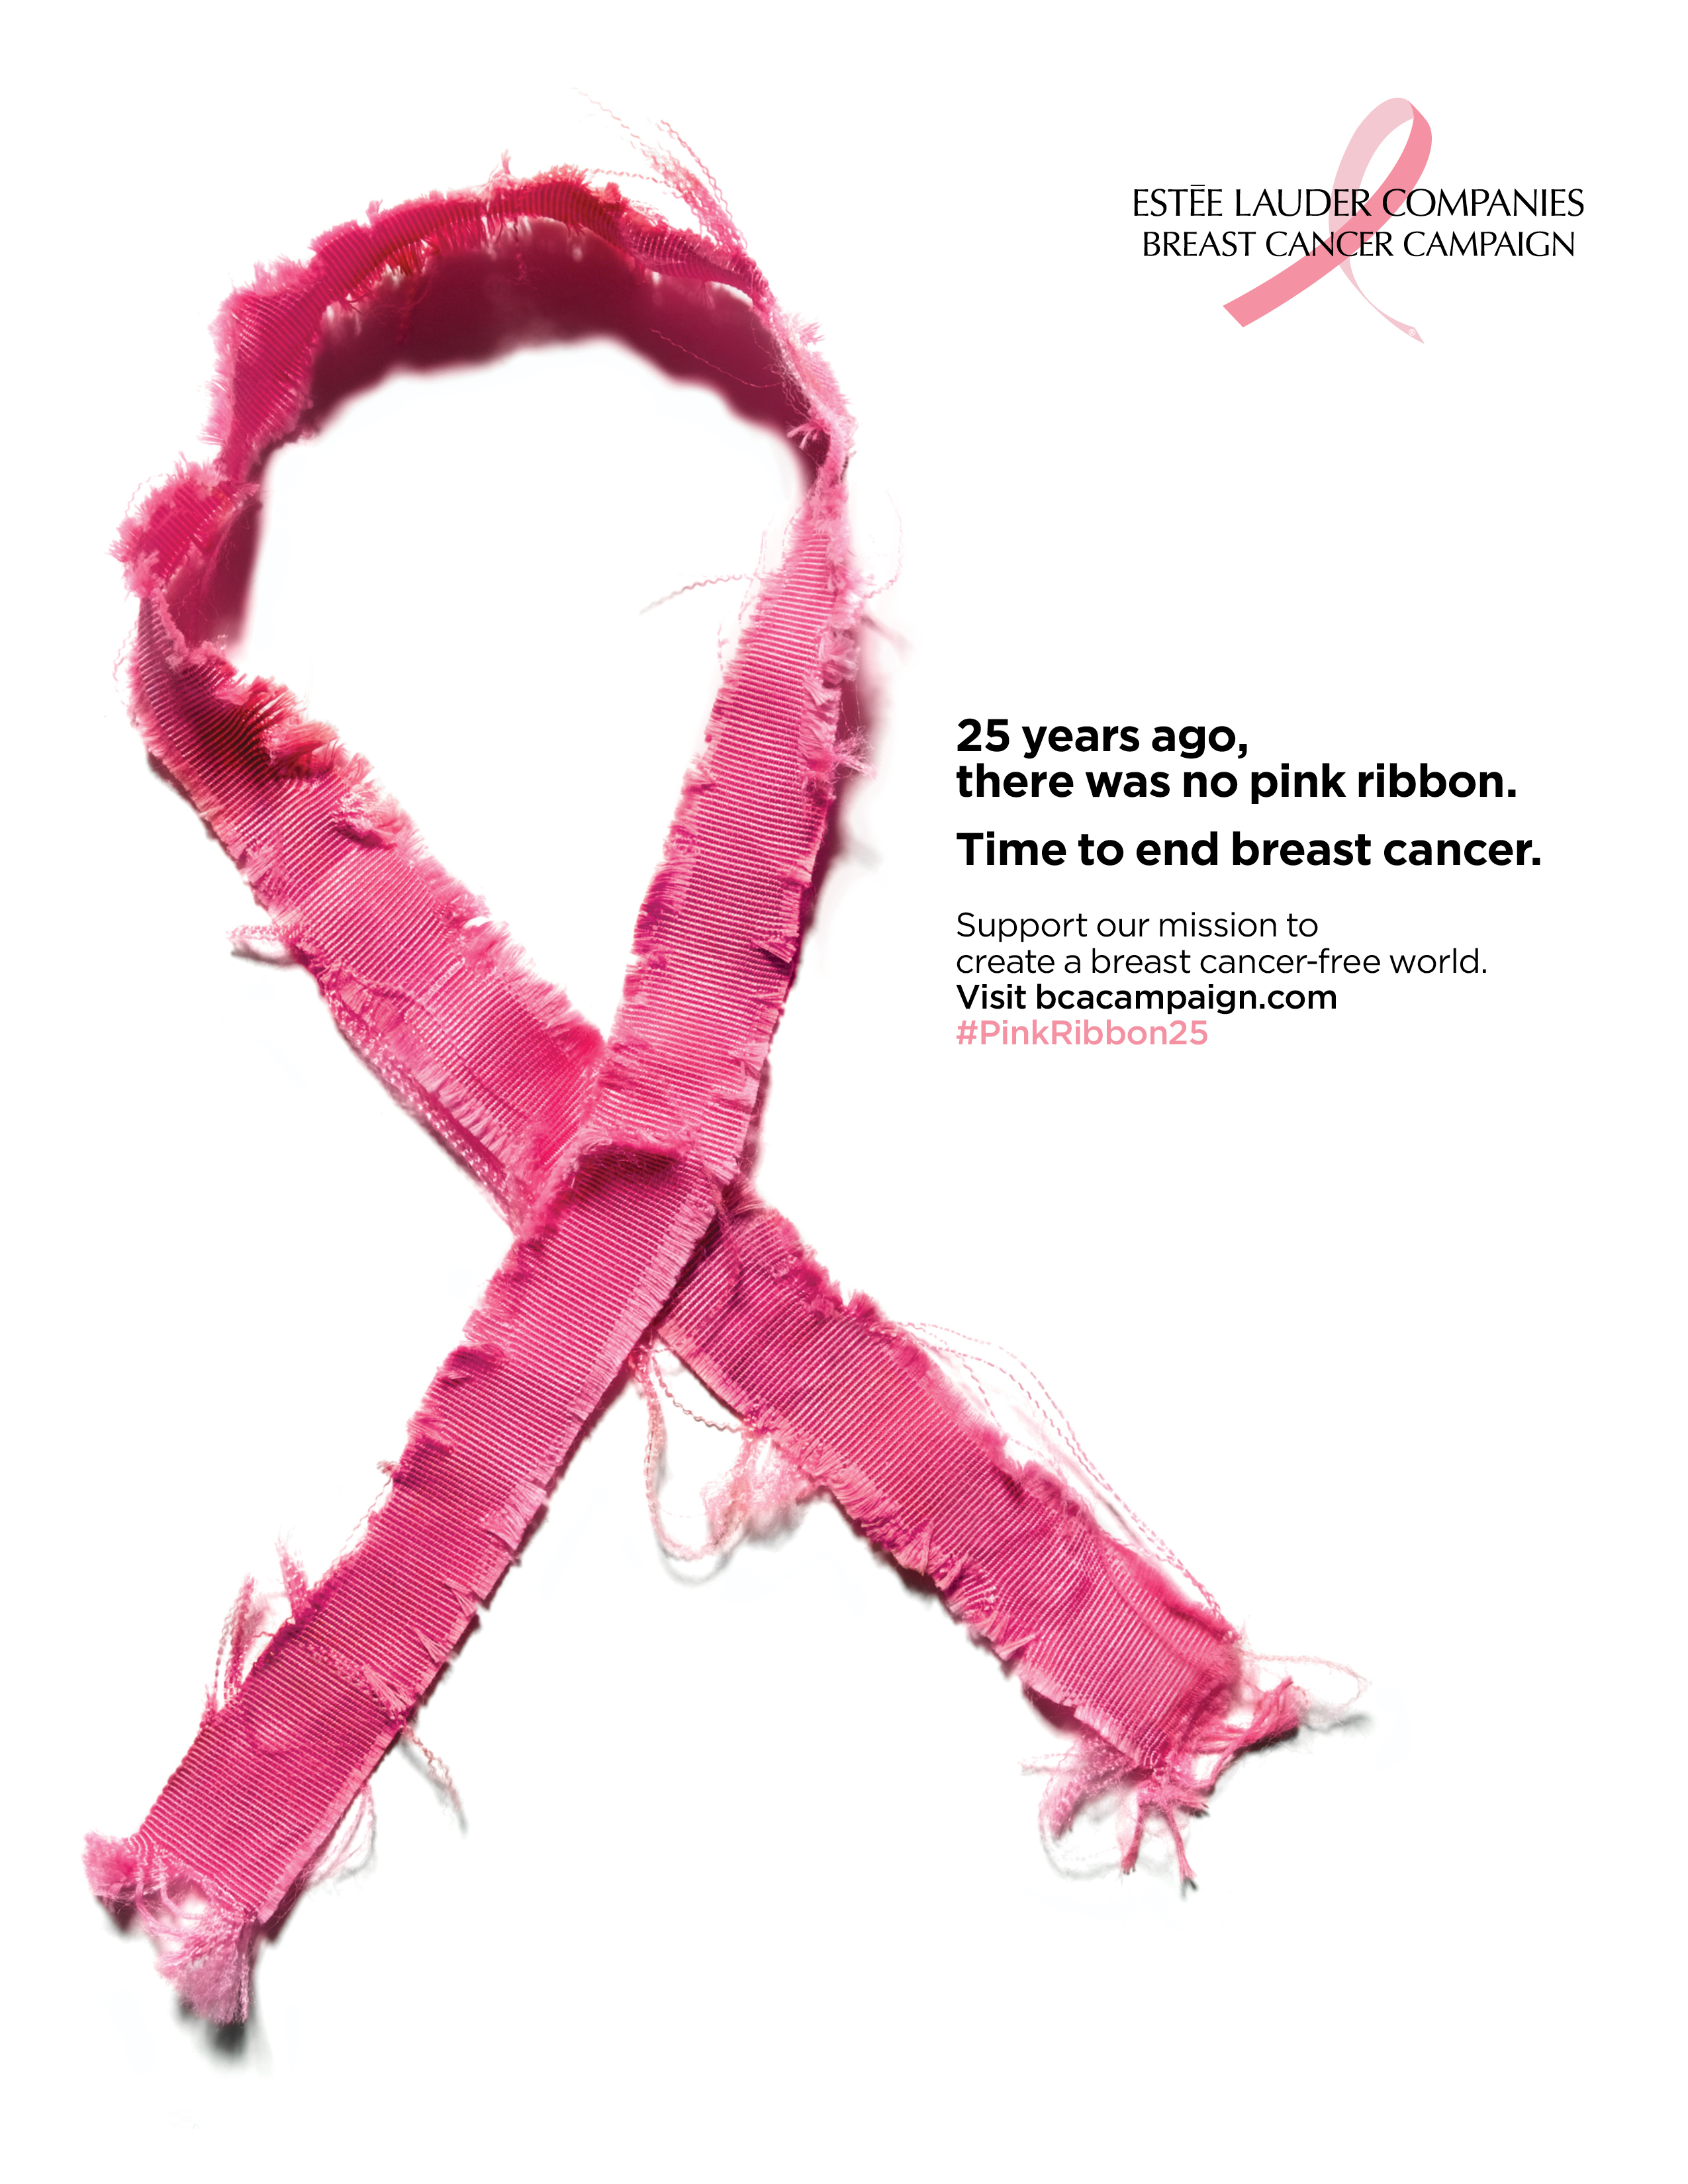 The Pink Ribbon Turns 25 The Estee Lauder Companies Breast